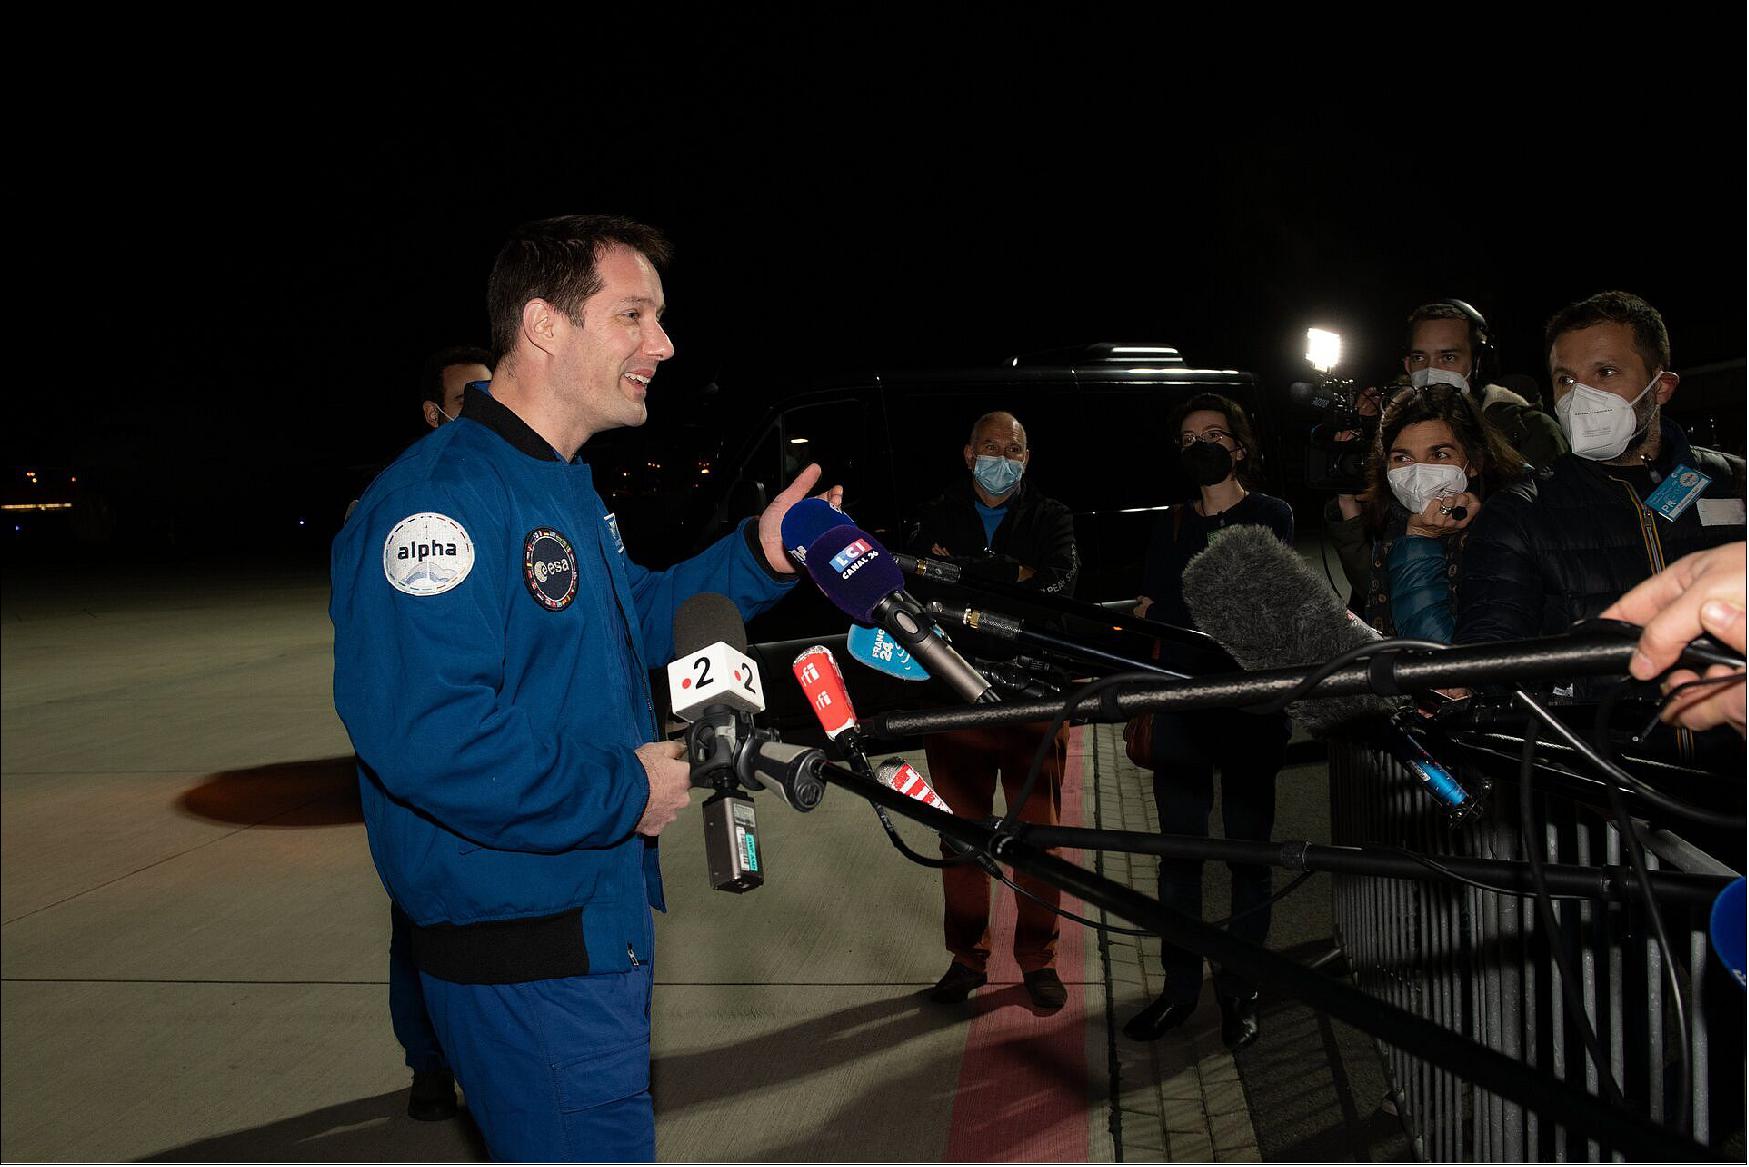 Figure 8: Thomas Pesquet is being interviewed by the press after arriving in Cologne, Germany (image credit: ESA, P. Sebirot)